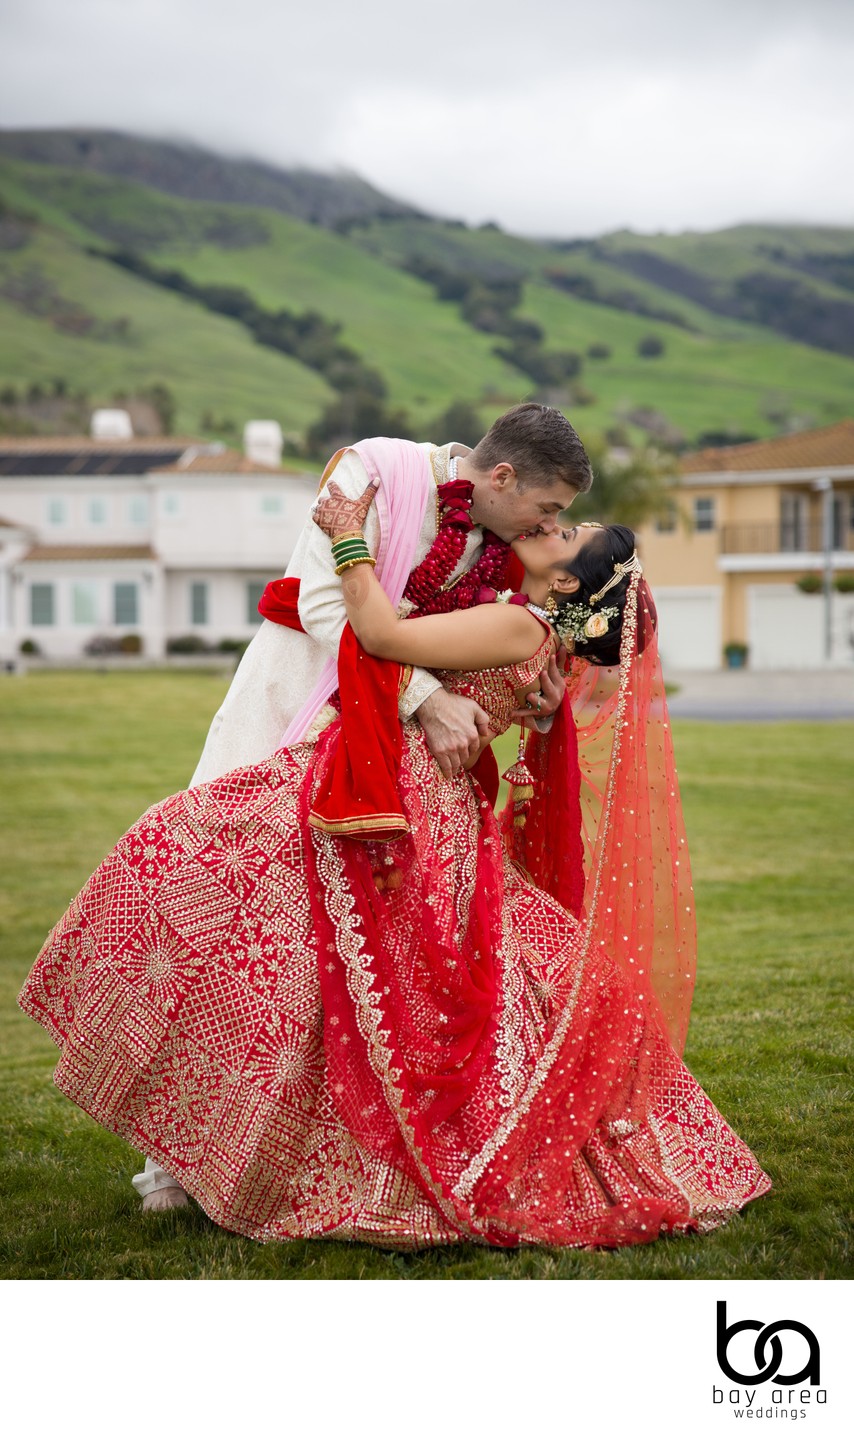 Top Indian Wedding Photographer in the Bay Area